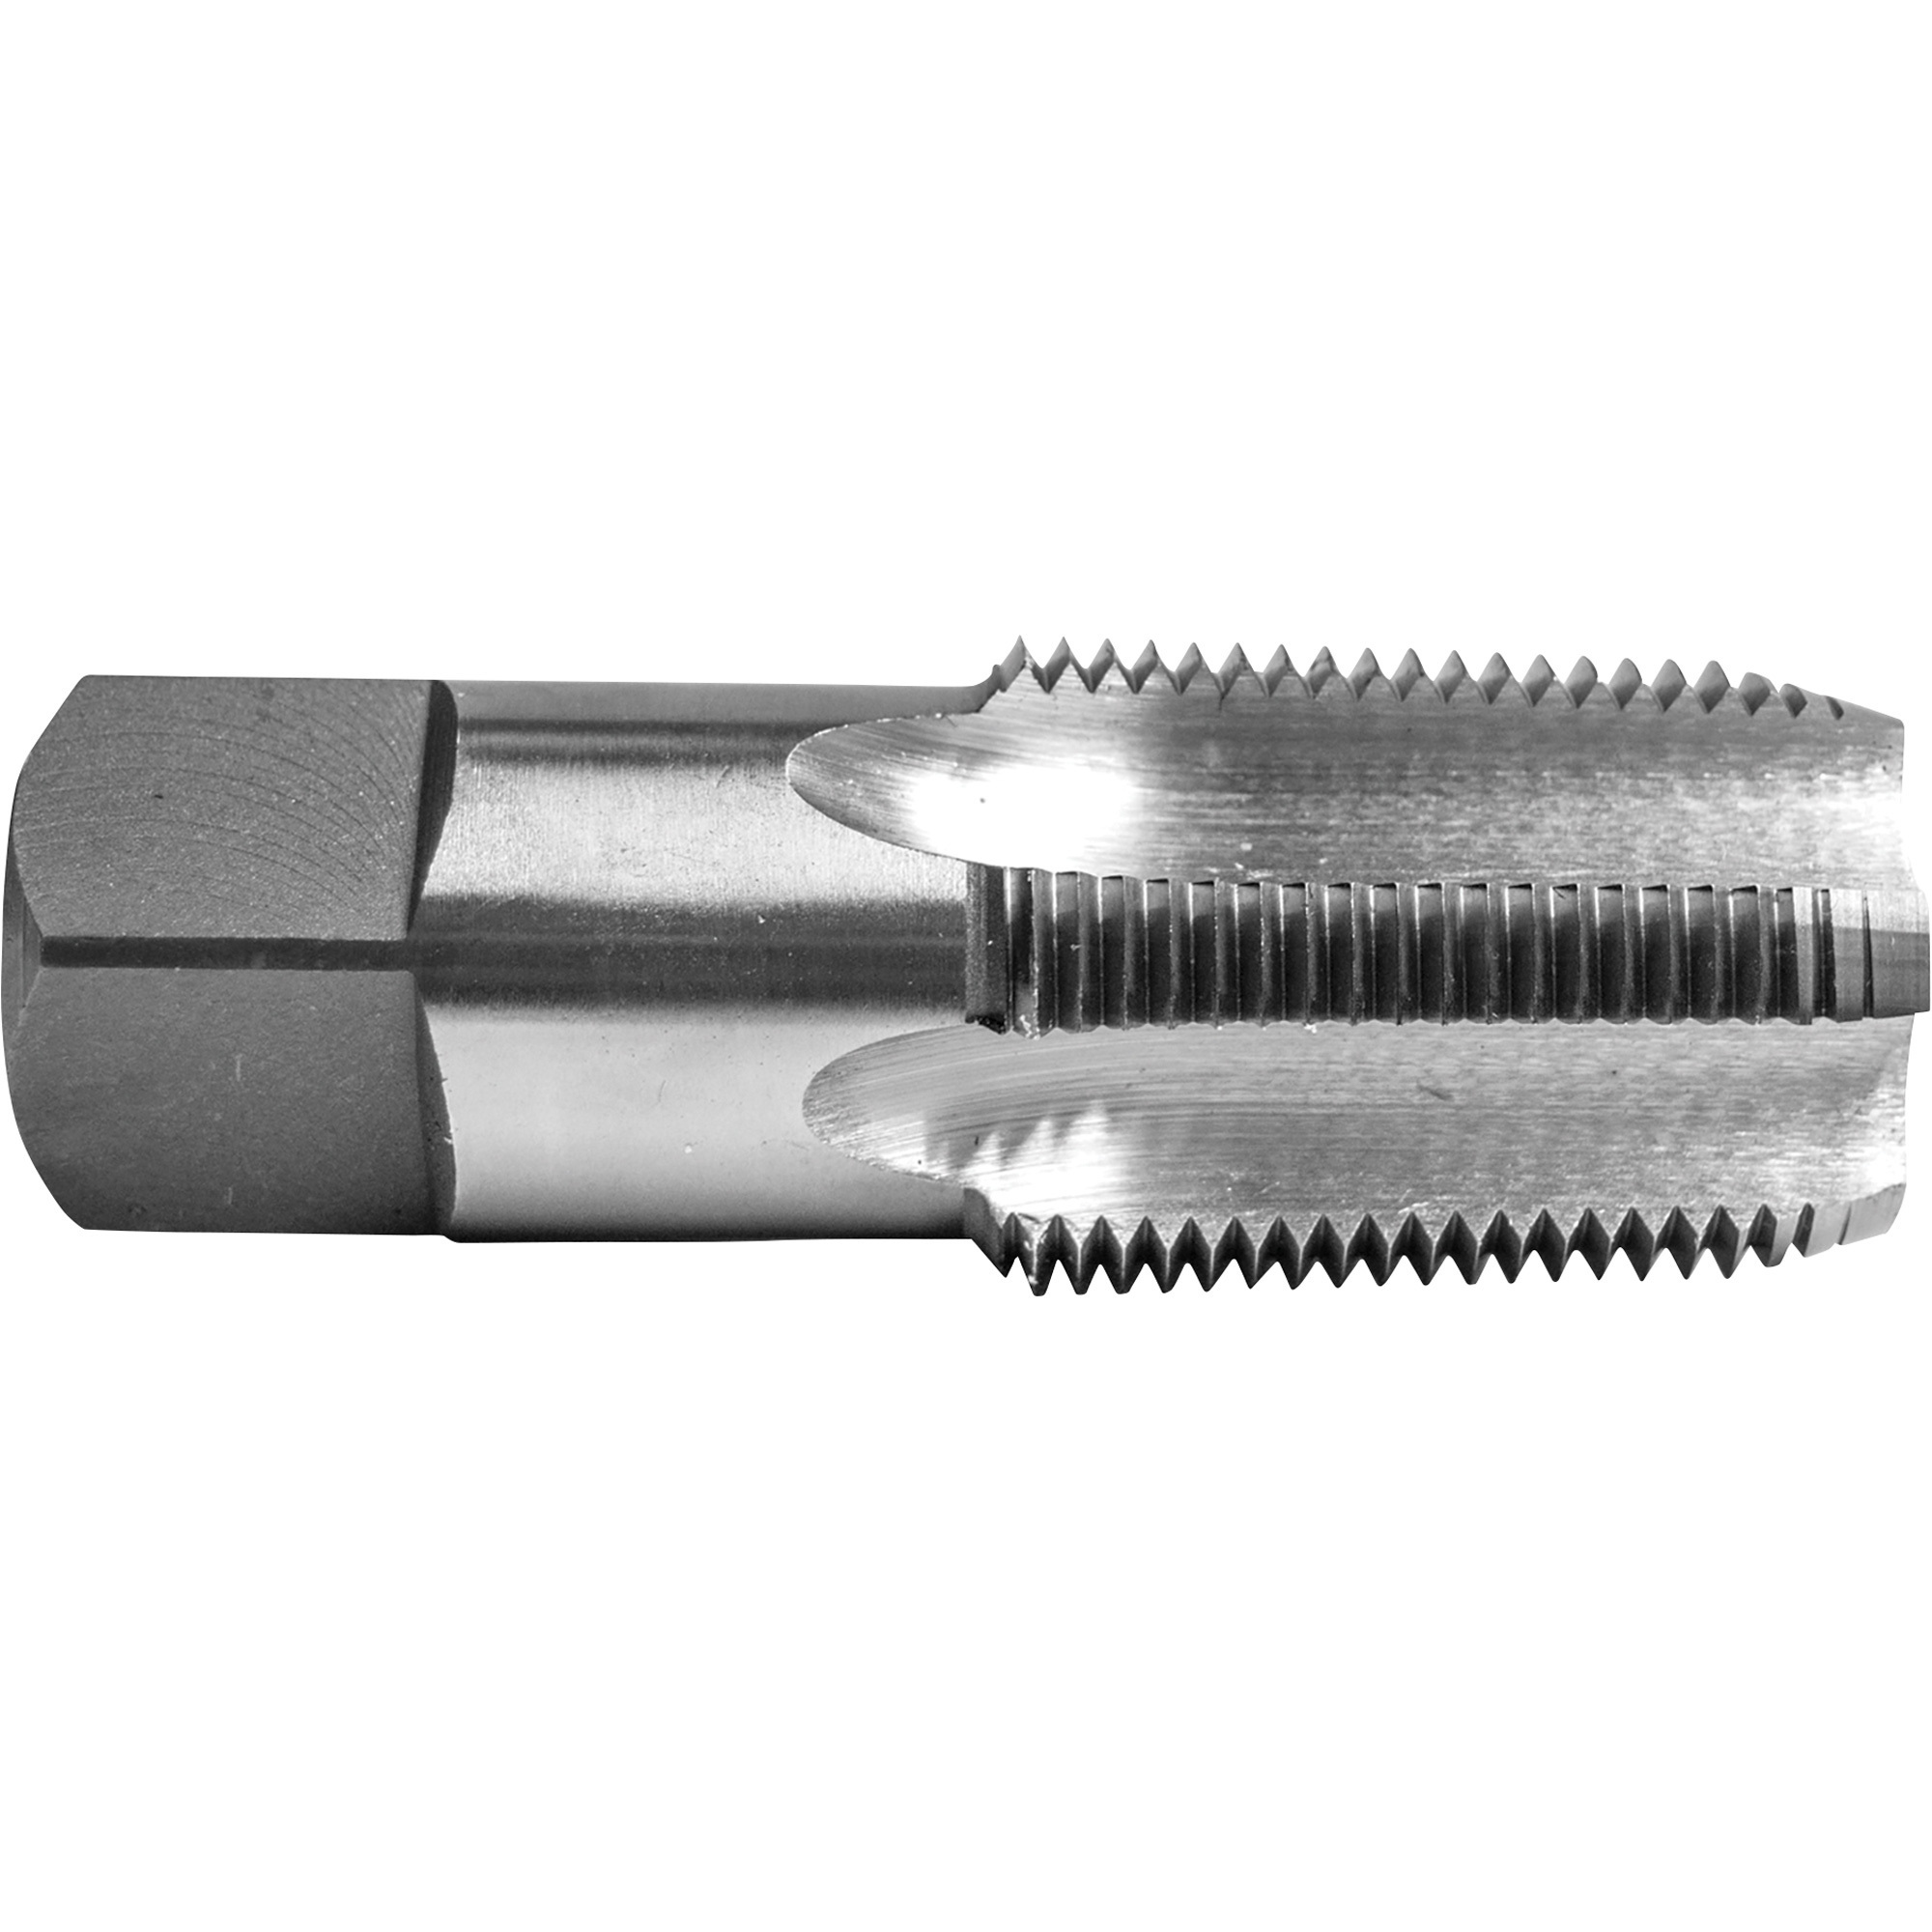 Century Drill and Tool 3/4-14 NPT Tap, Model 97205